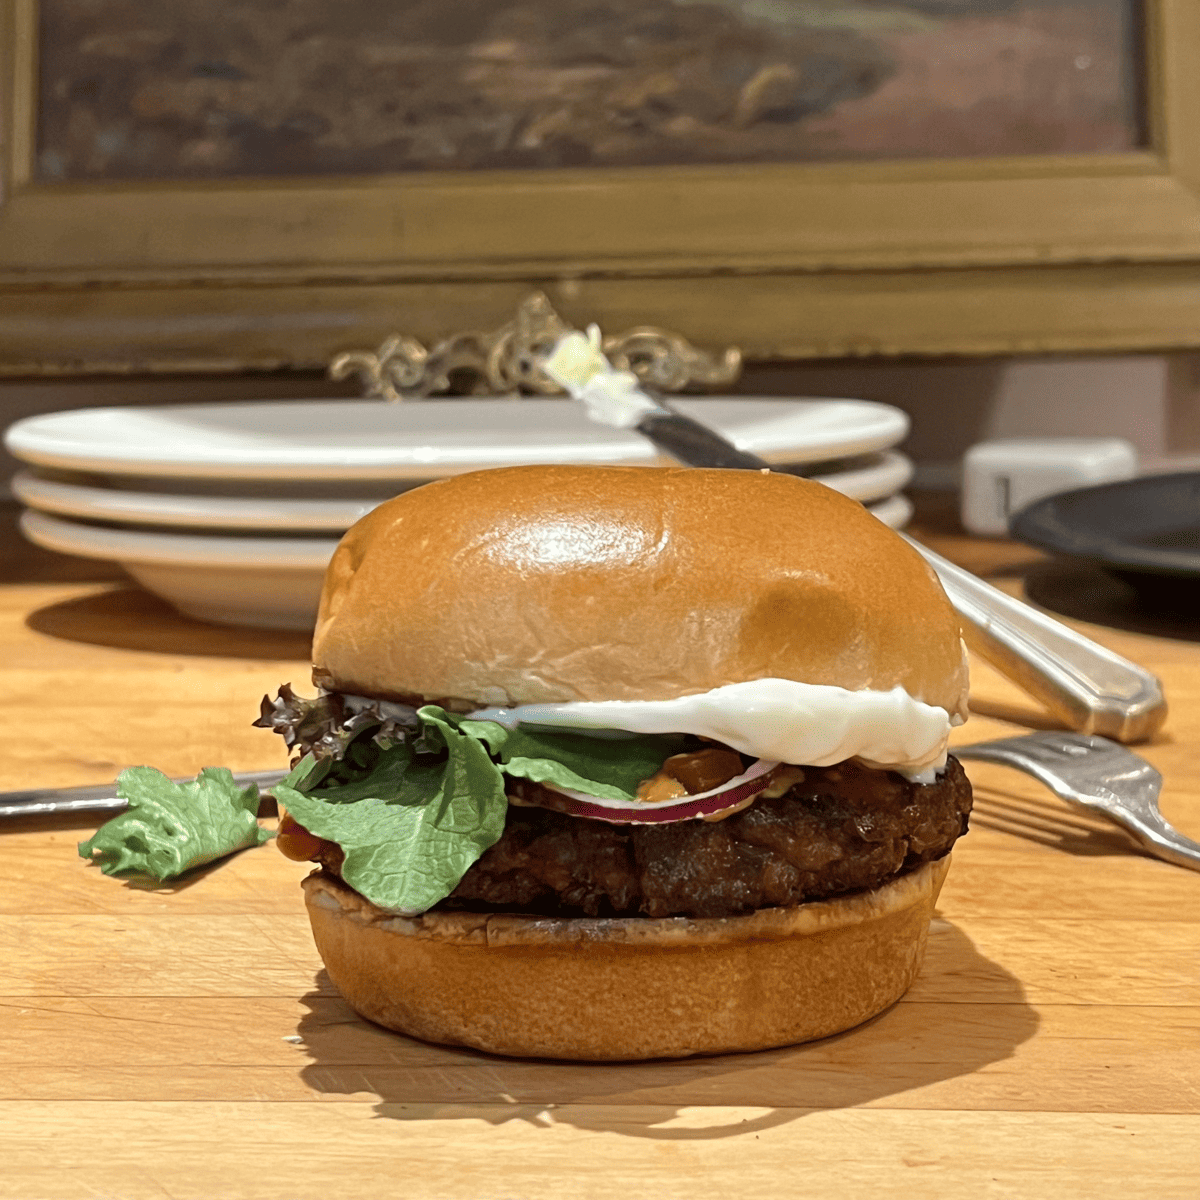 A loaded plant based burger on a butcher block countertop.